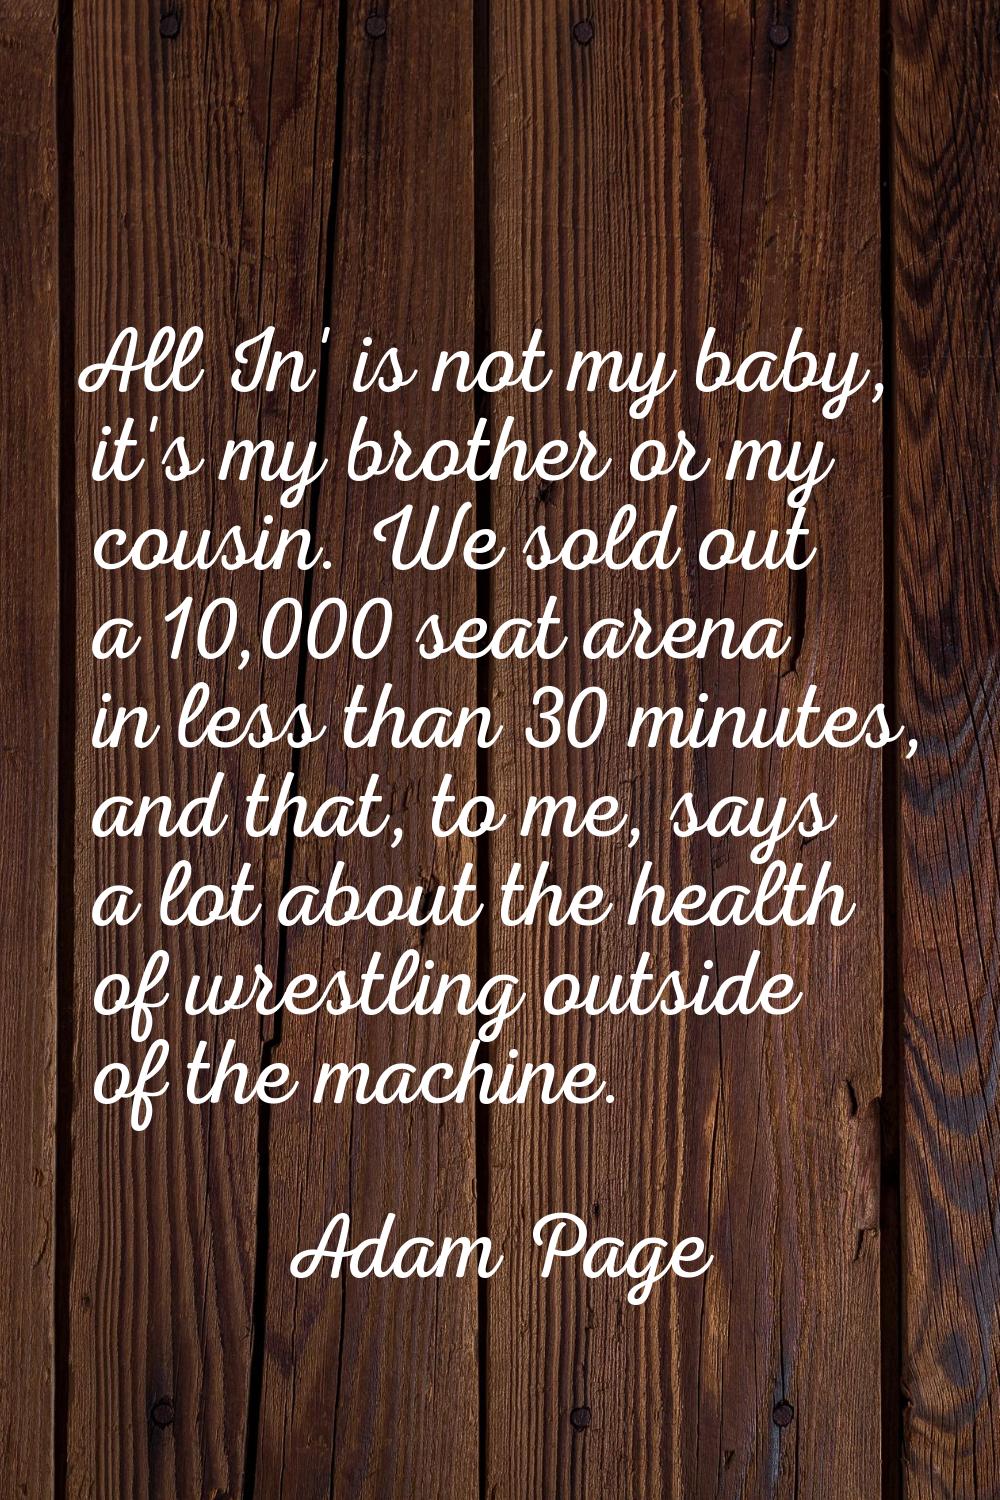 All In' is not my baby, it's my brother or my cousin. We sold out a 10,000 seat arena in less than 